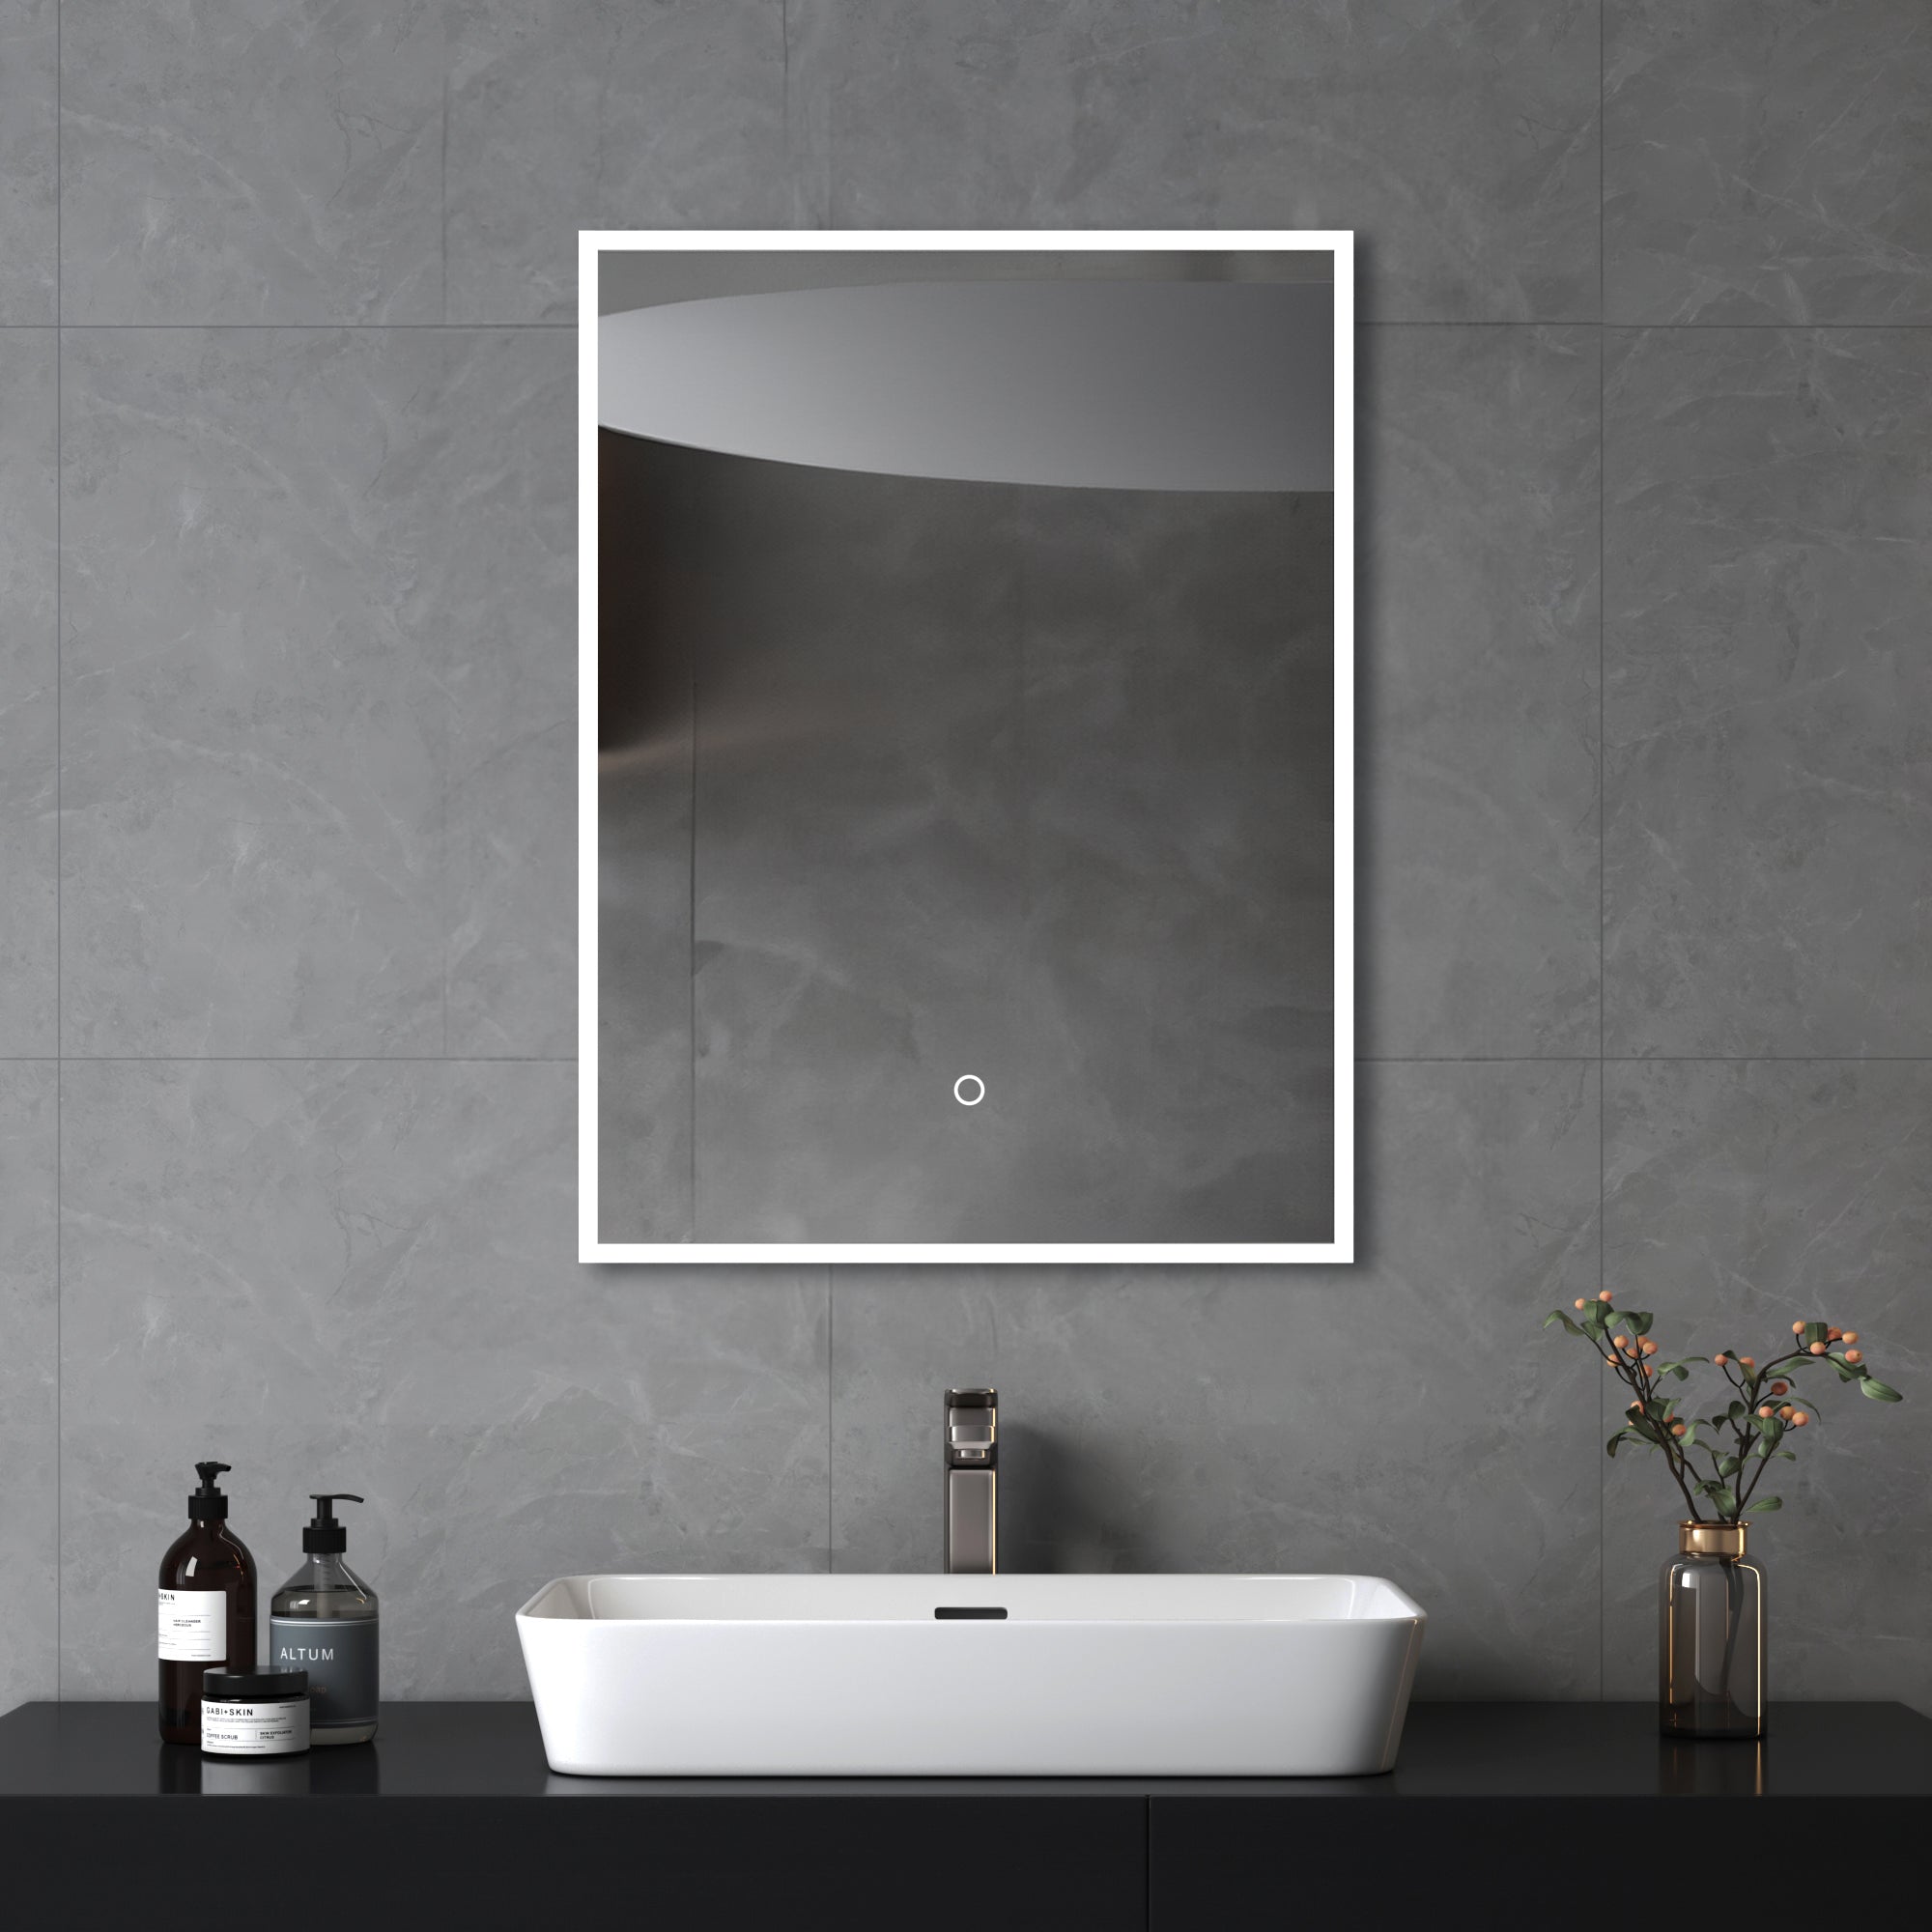 Modern bathroom interior with frameless led mirror over a sleek countertop basin, complemented by minimalistic accessories,  featuring dreamwerks product.